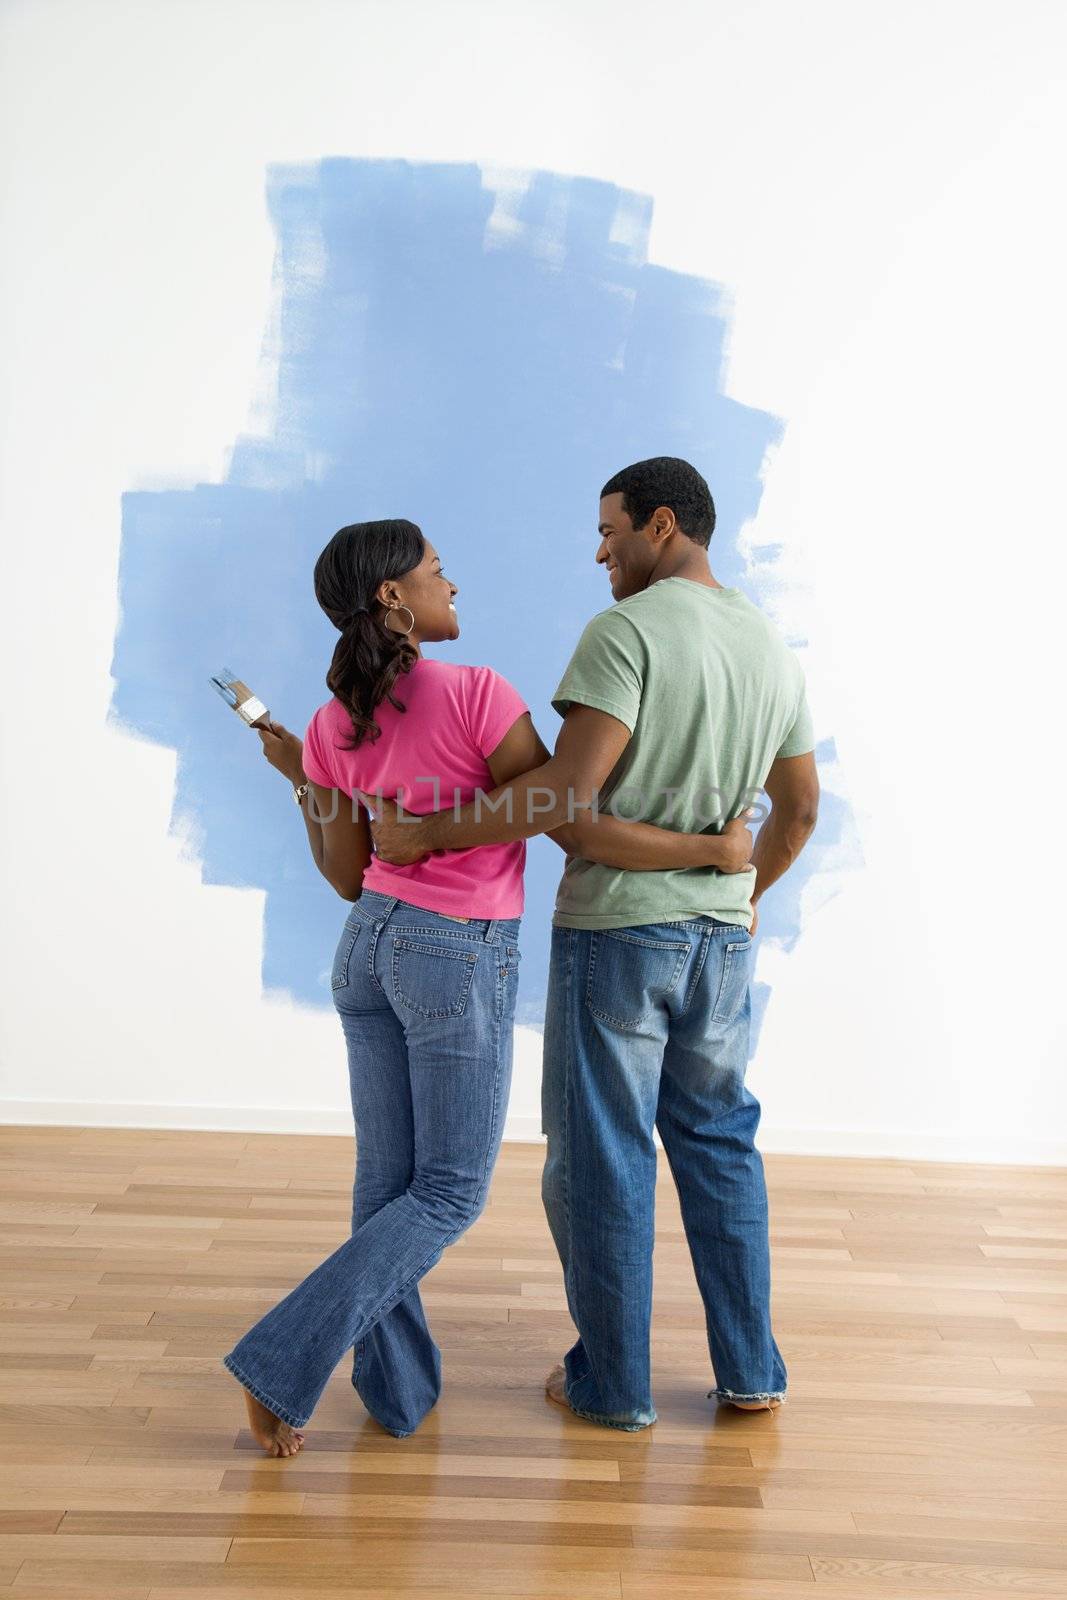 African American couple standing together next to half-painted wall discussing their work.